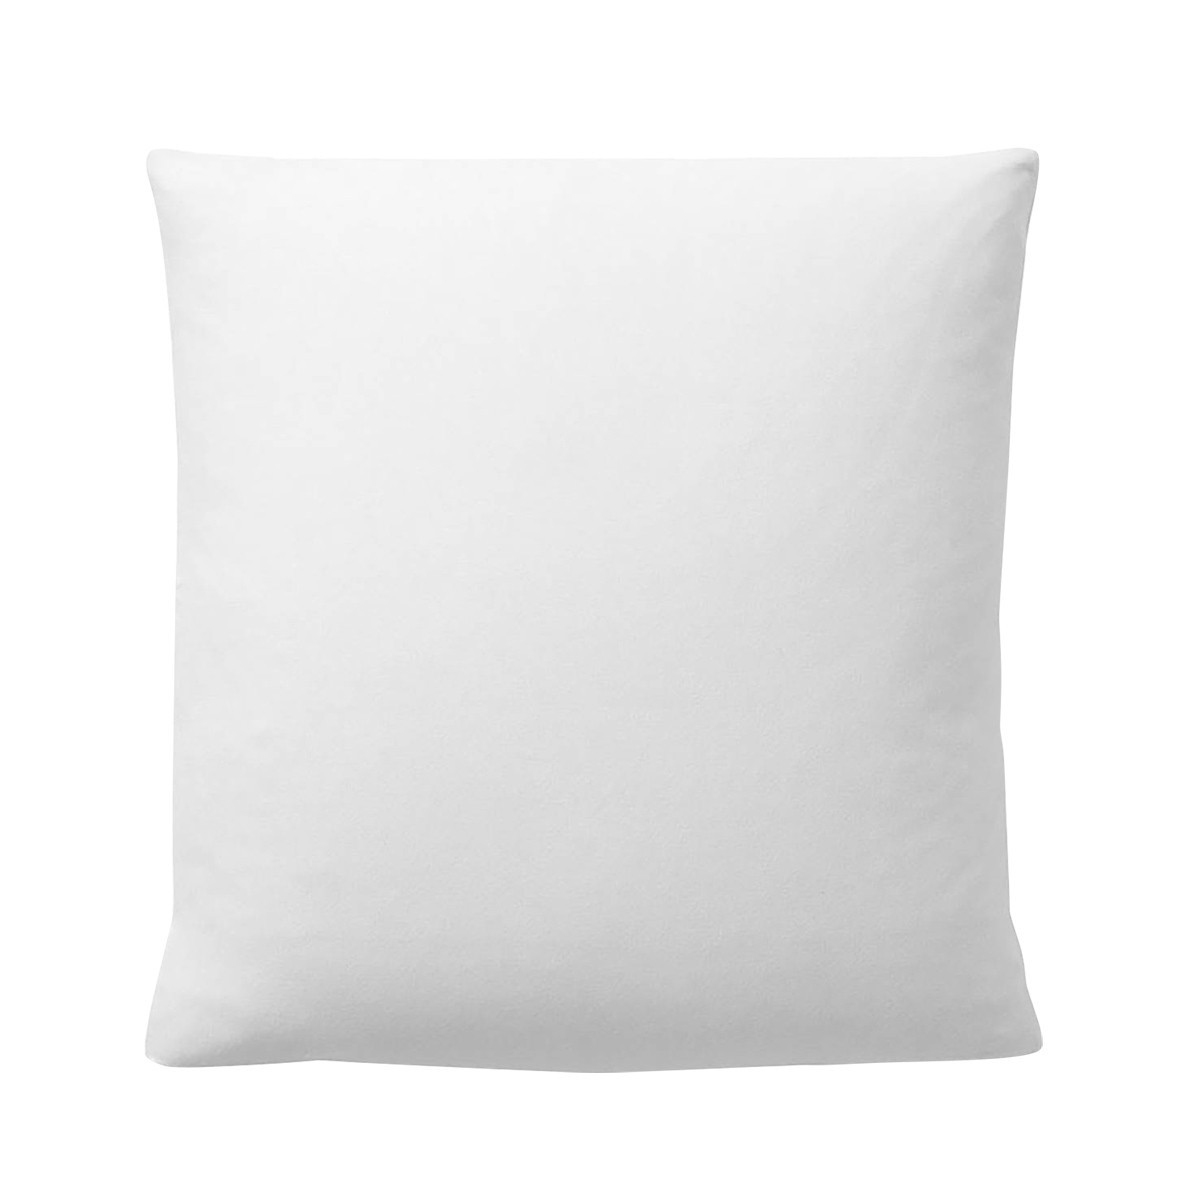 Luxury Pillow Protector - Quality for Restful Sleep